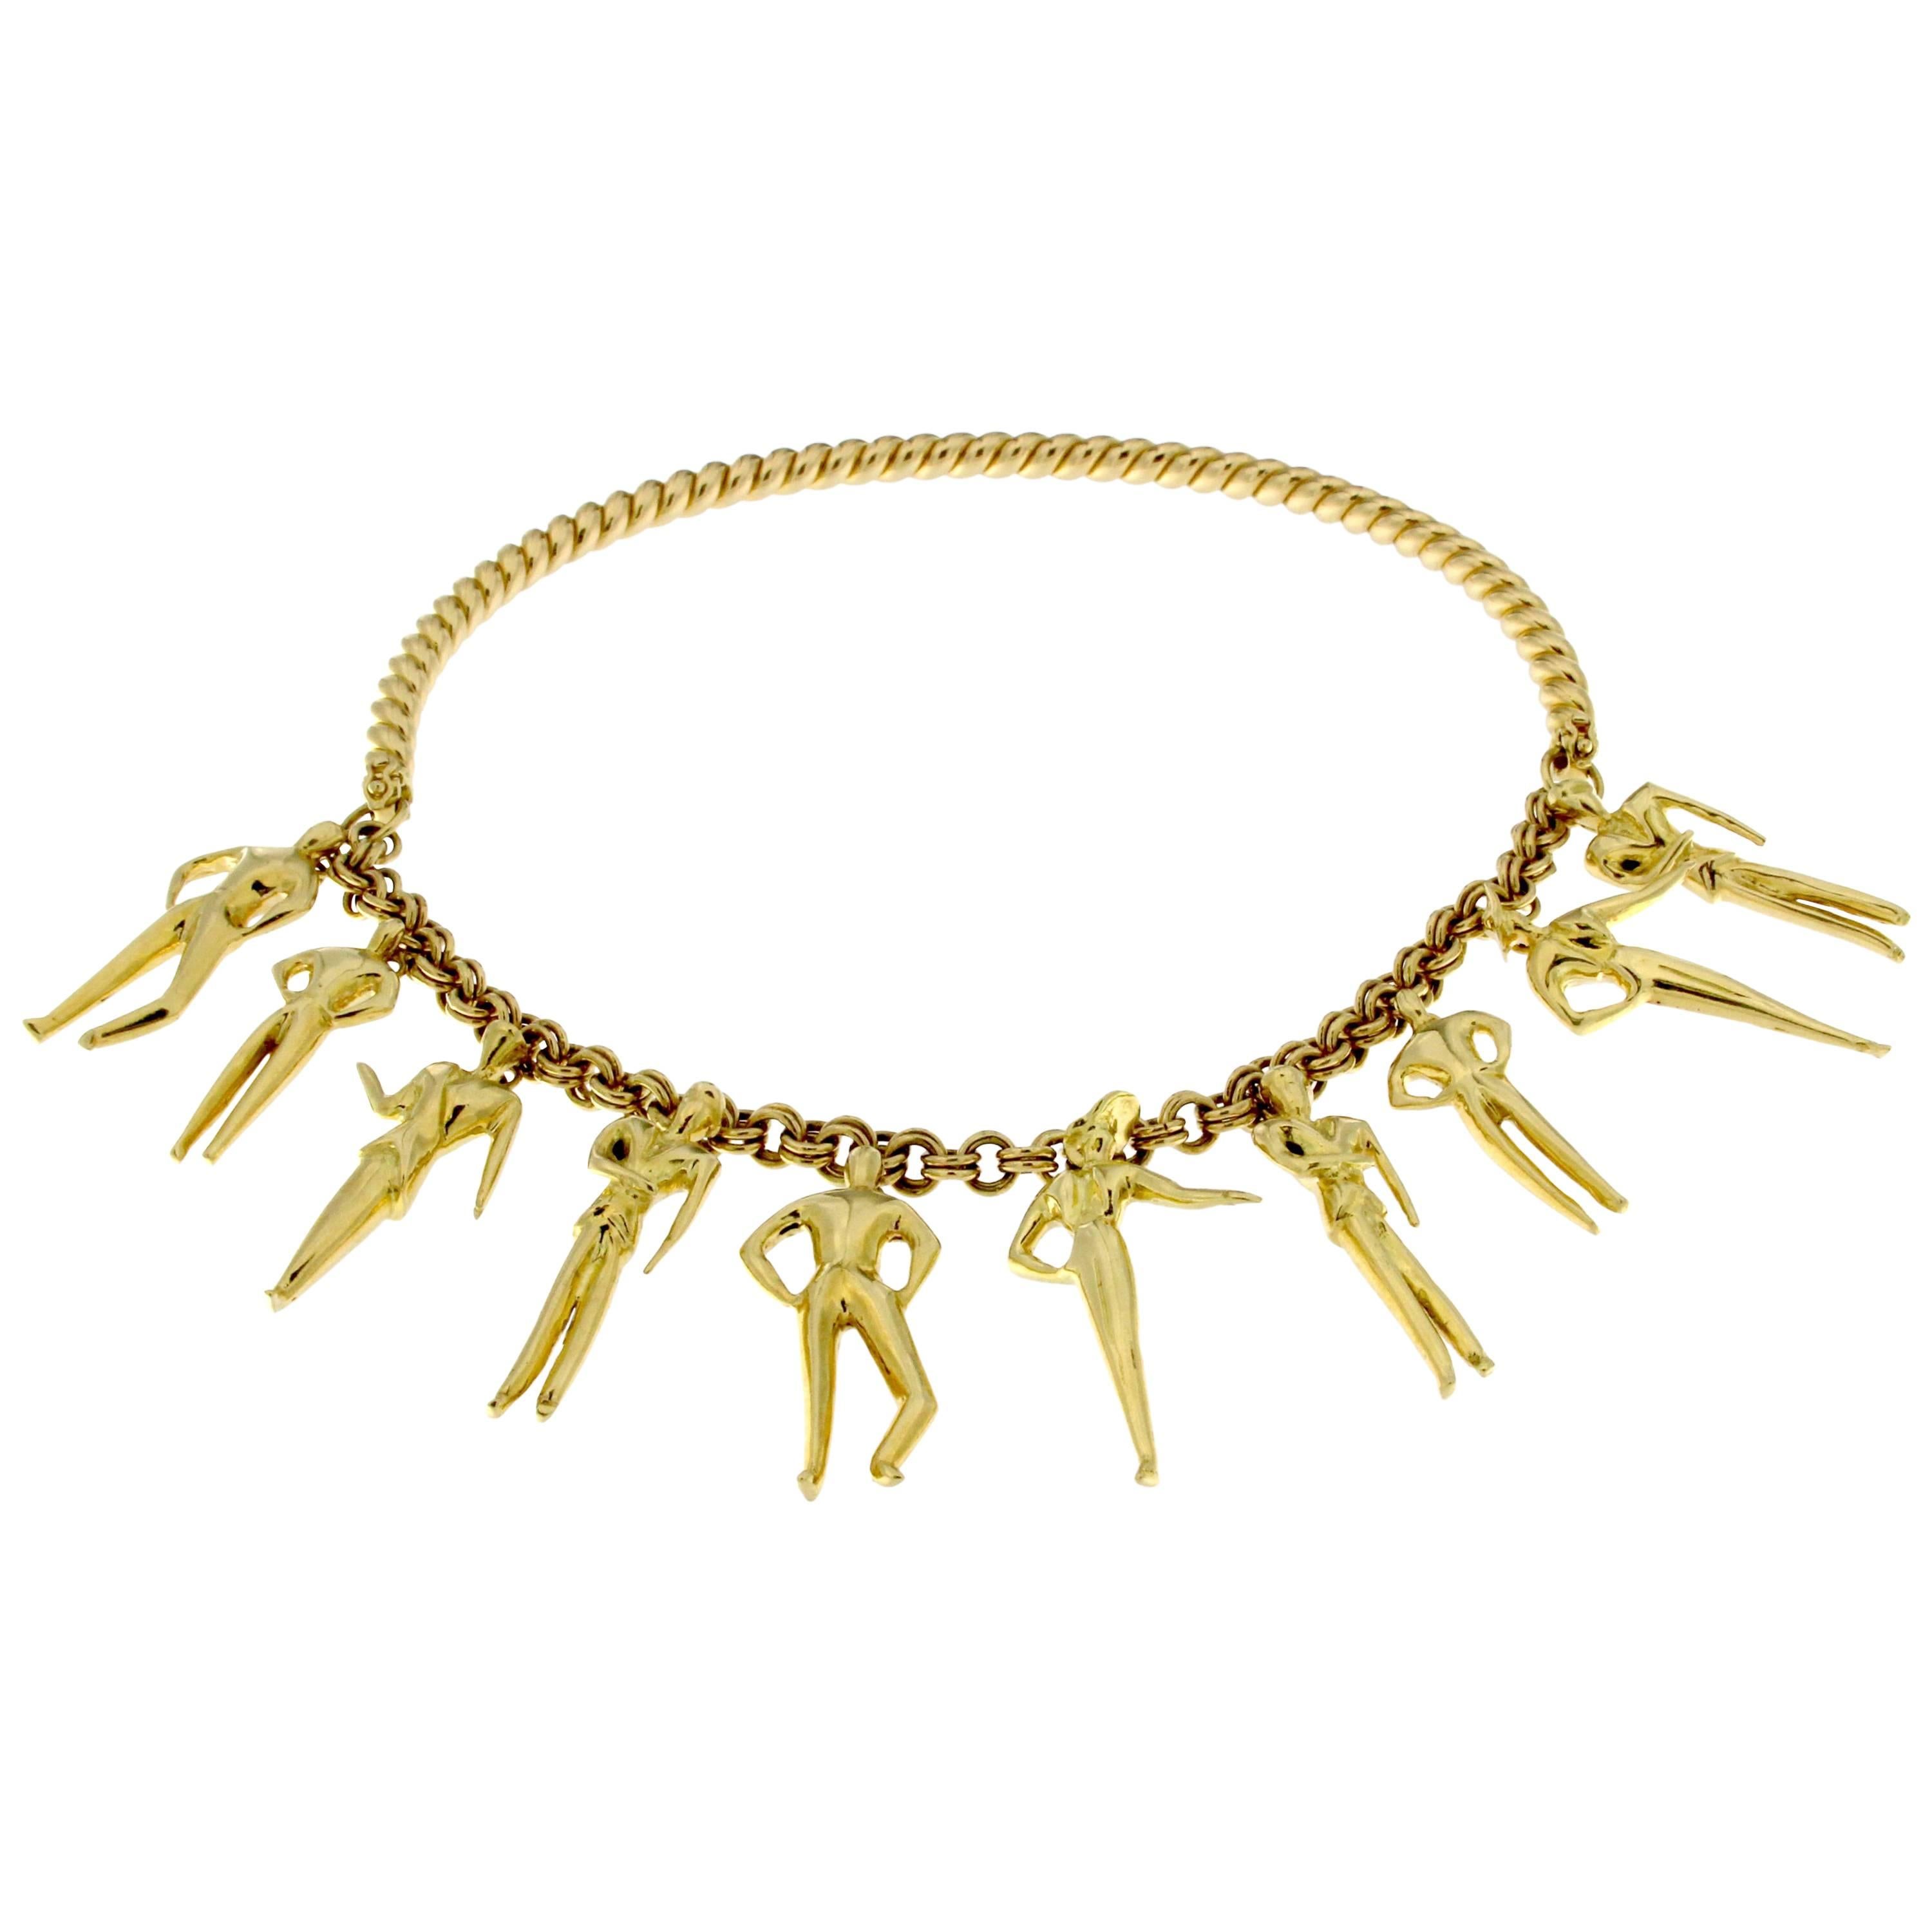 Necklace in 18 Karat Yellow Gold